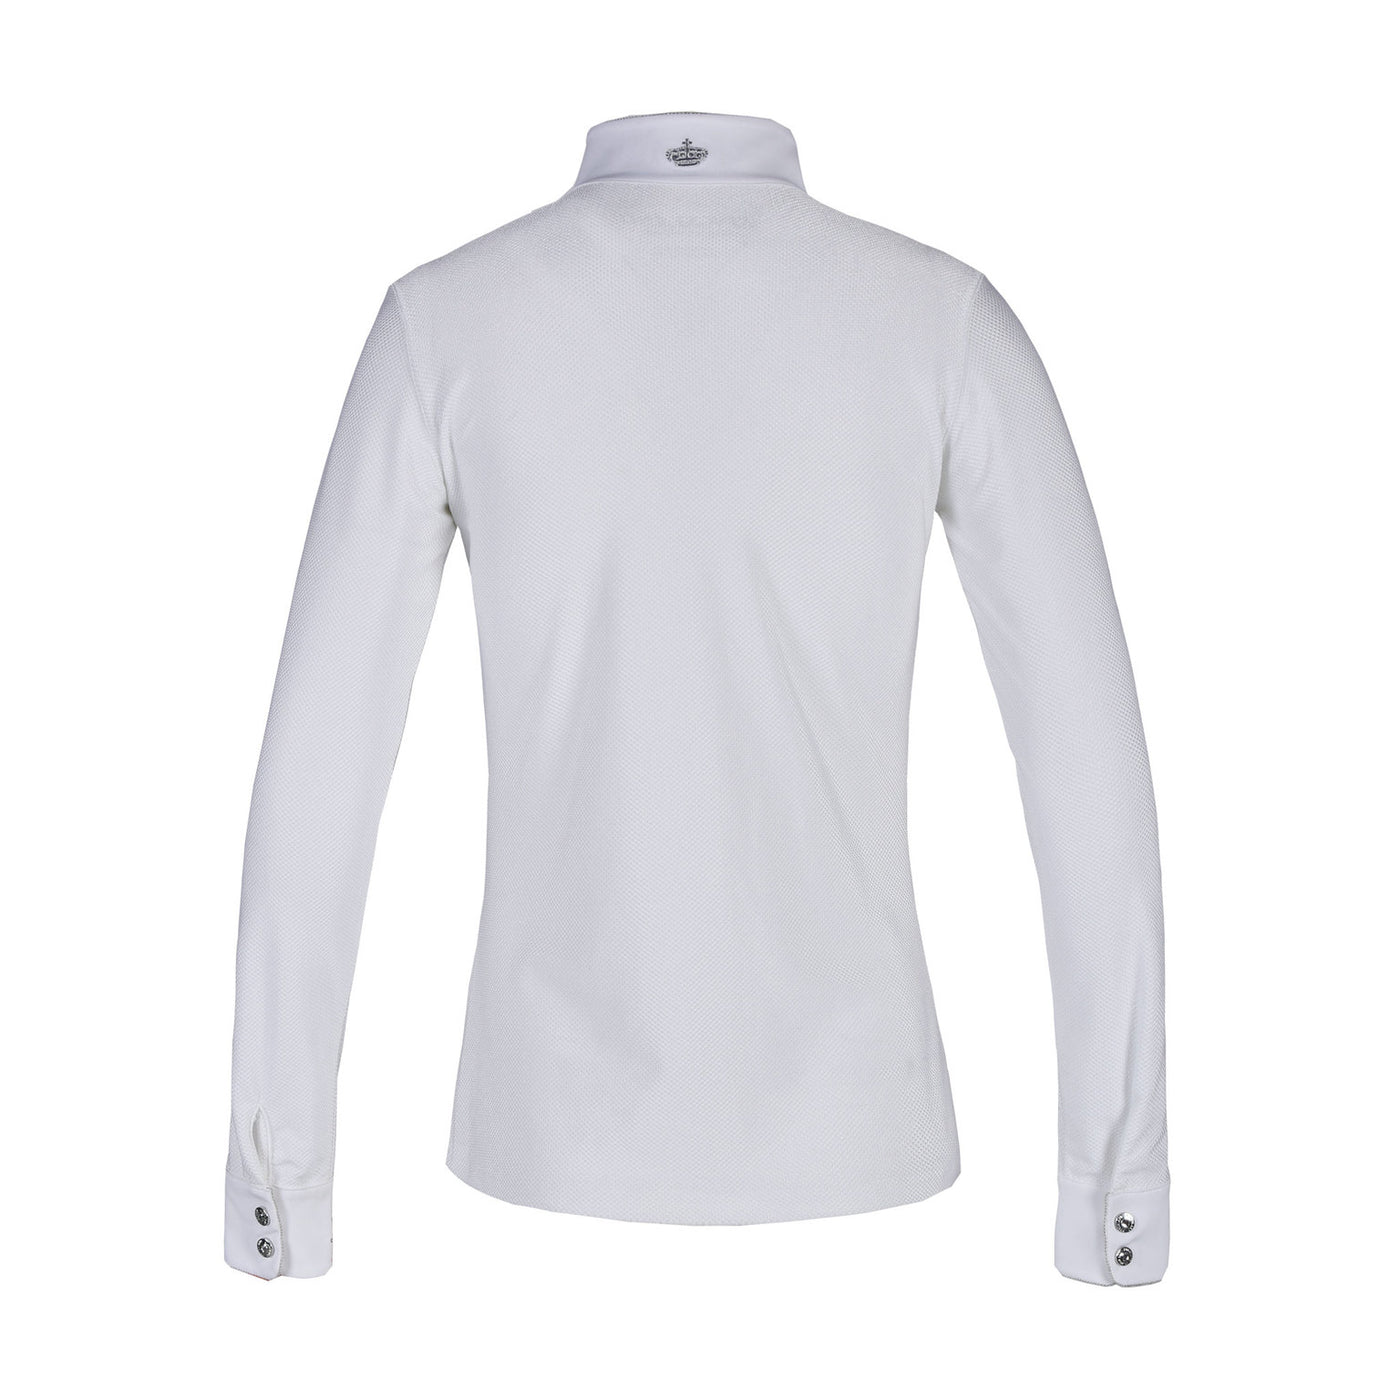 KLmacey Ladies LS Show Shirt - OUTLET